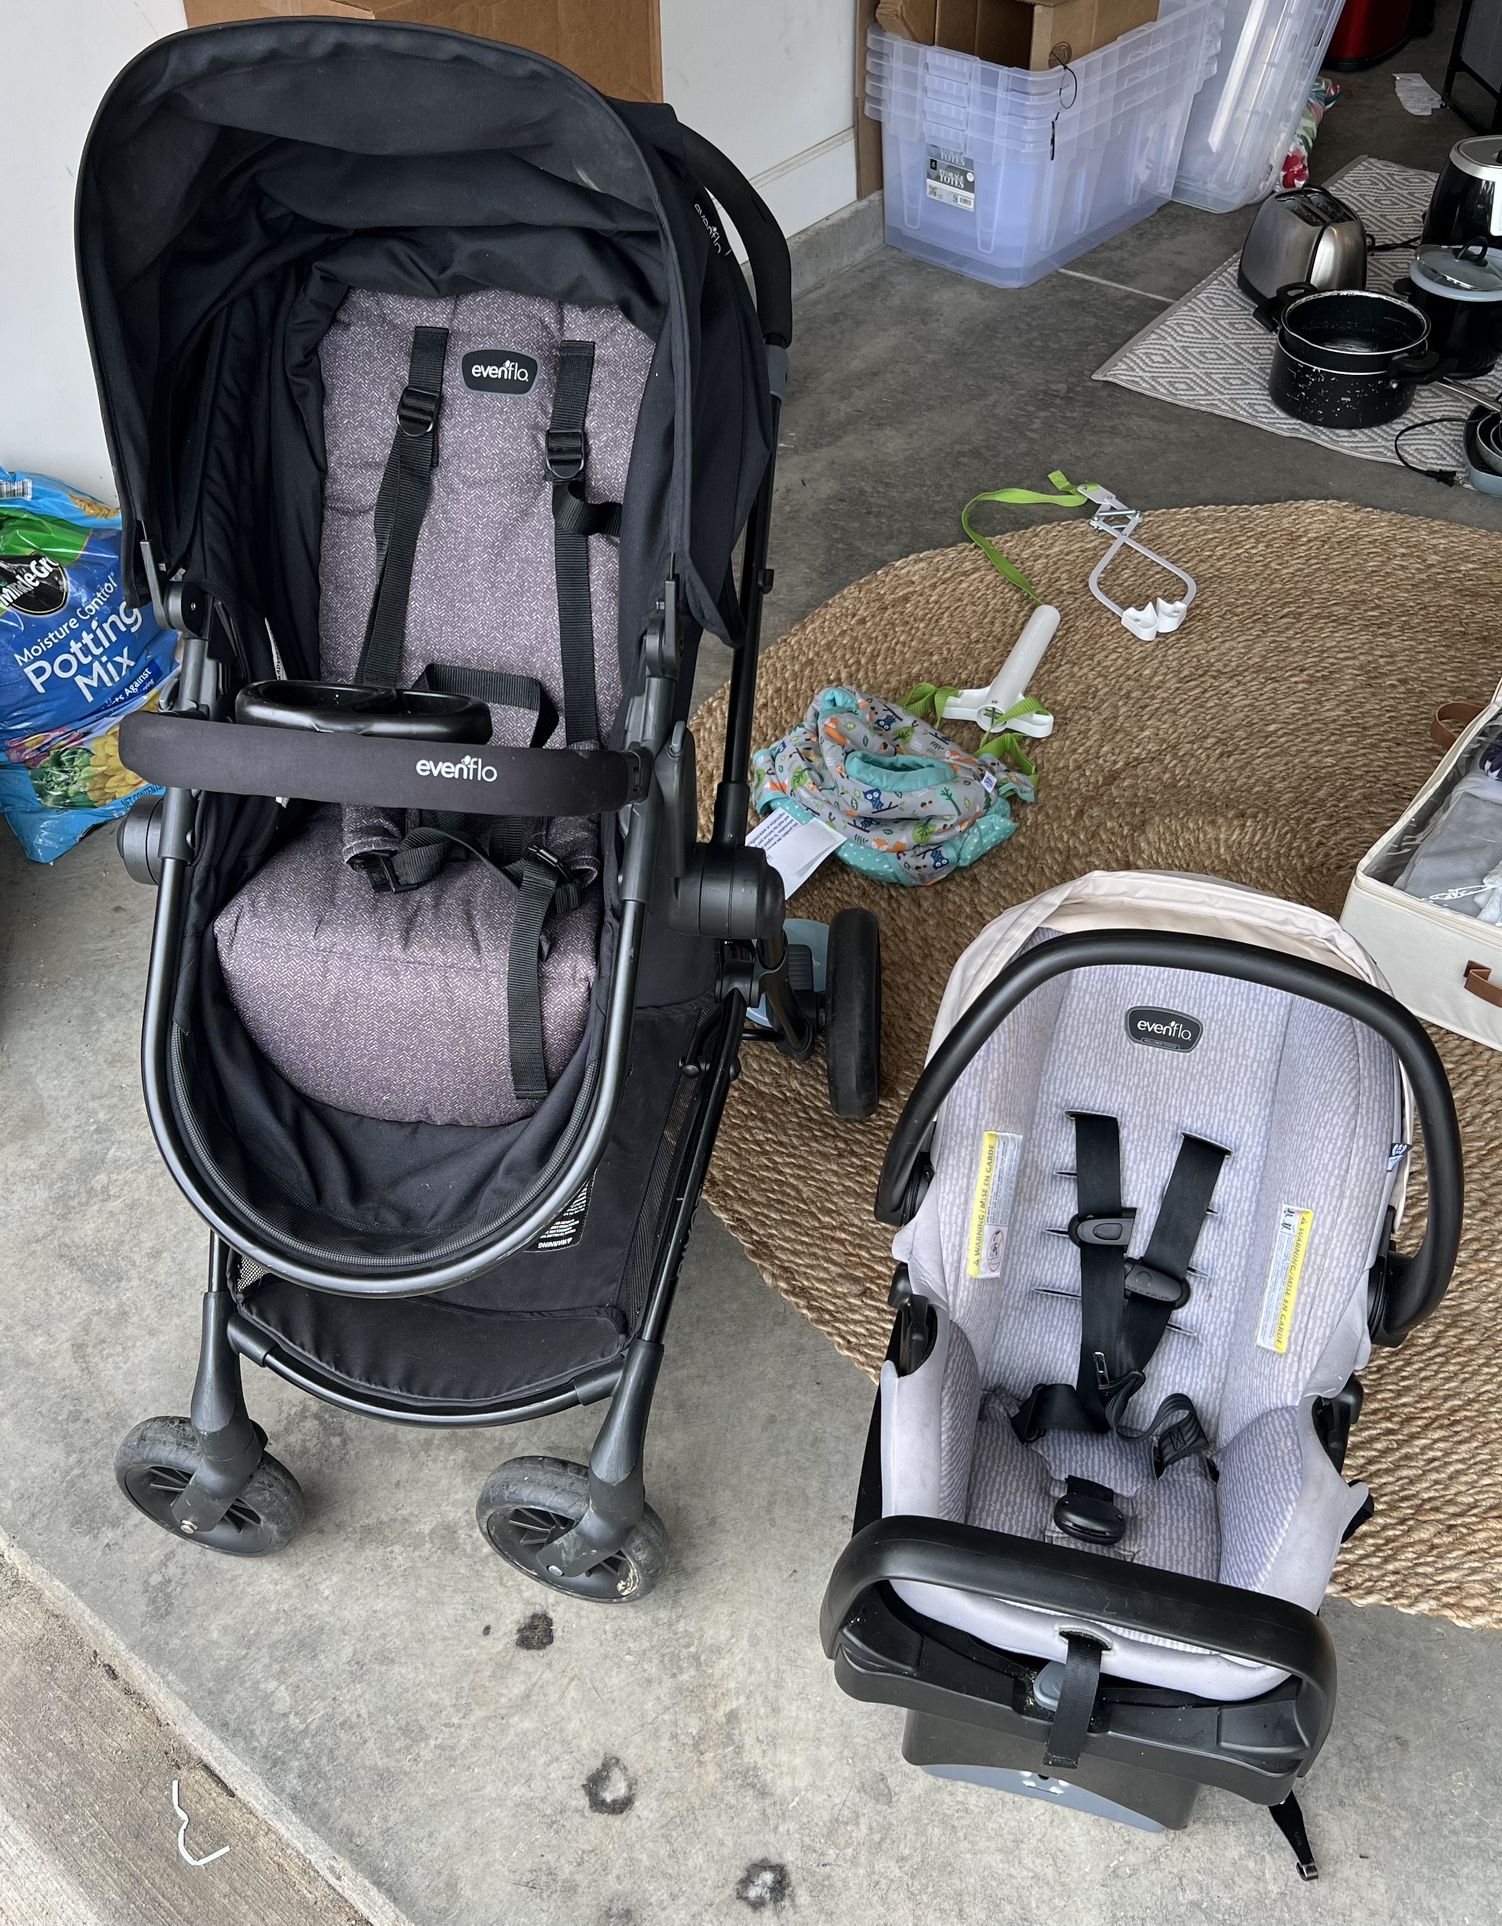 Infant To Toddler Stroller And Car seat 